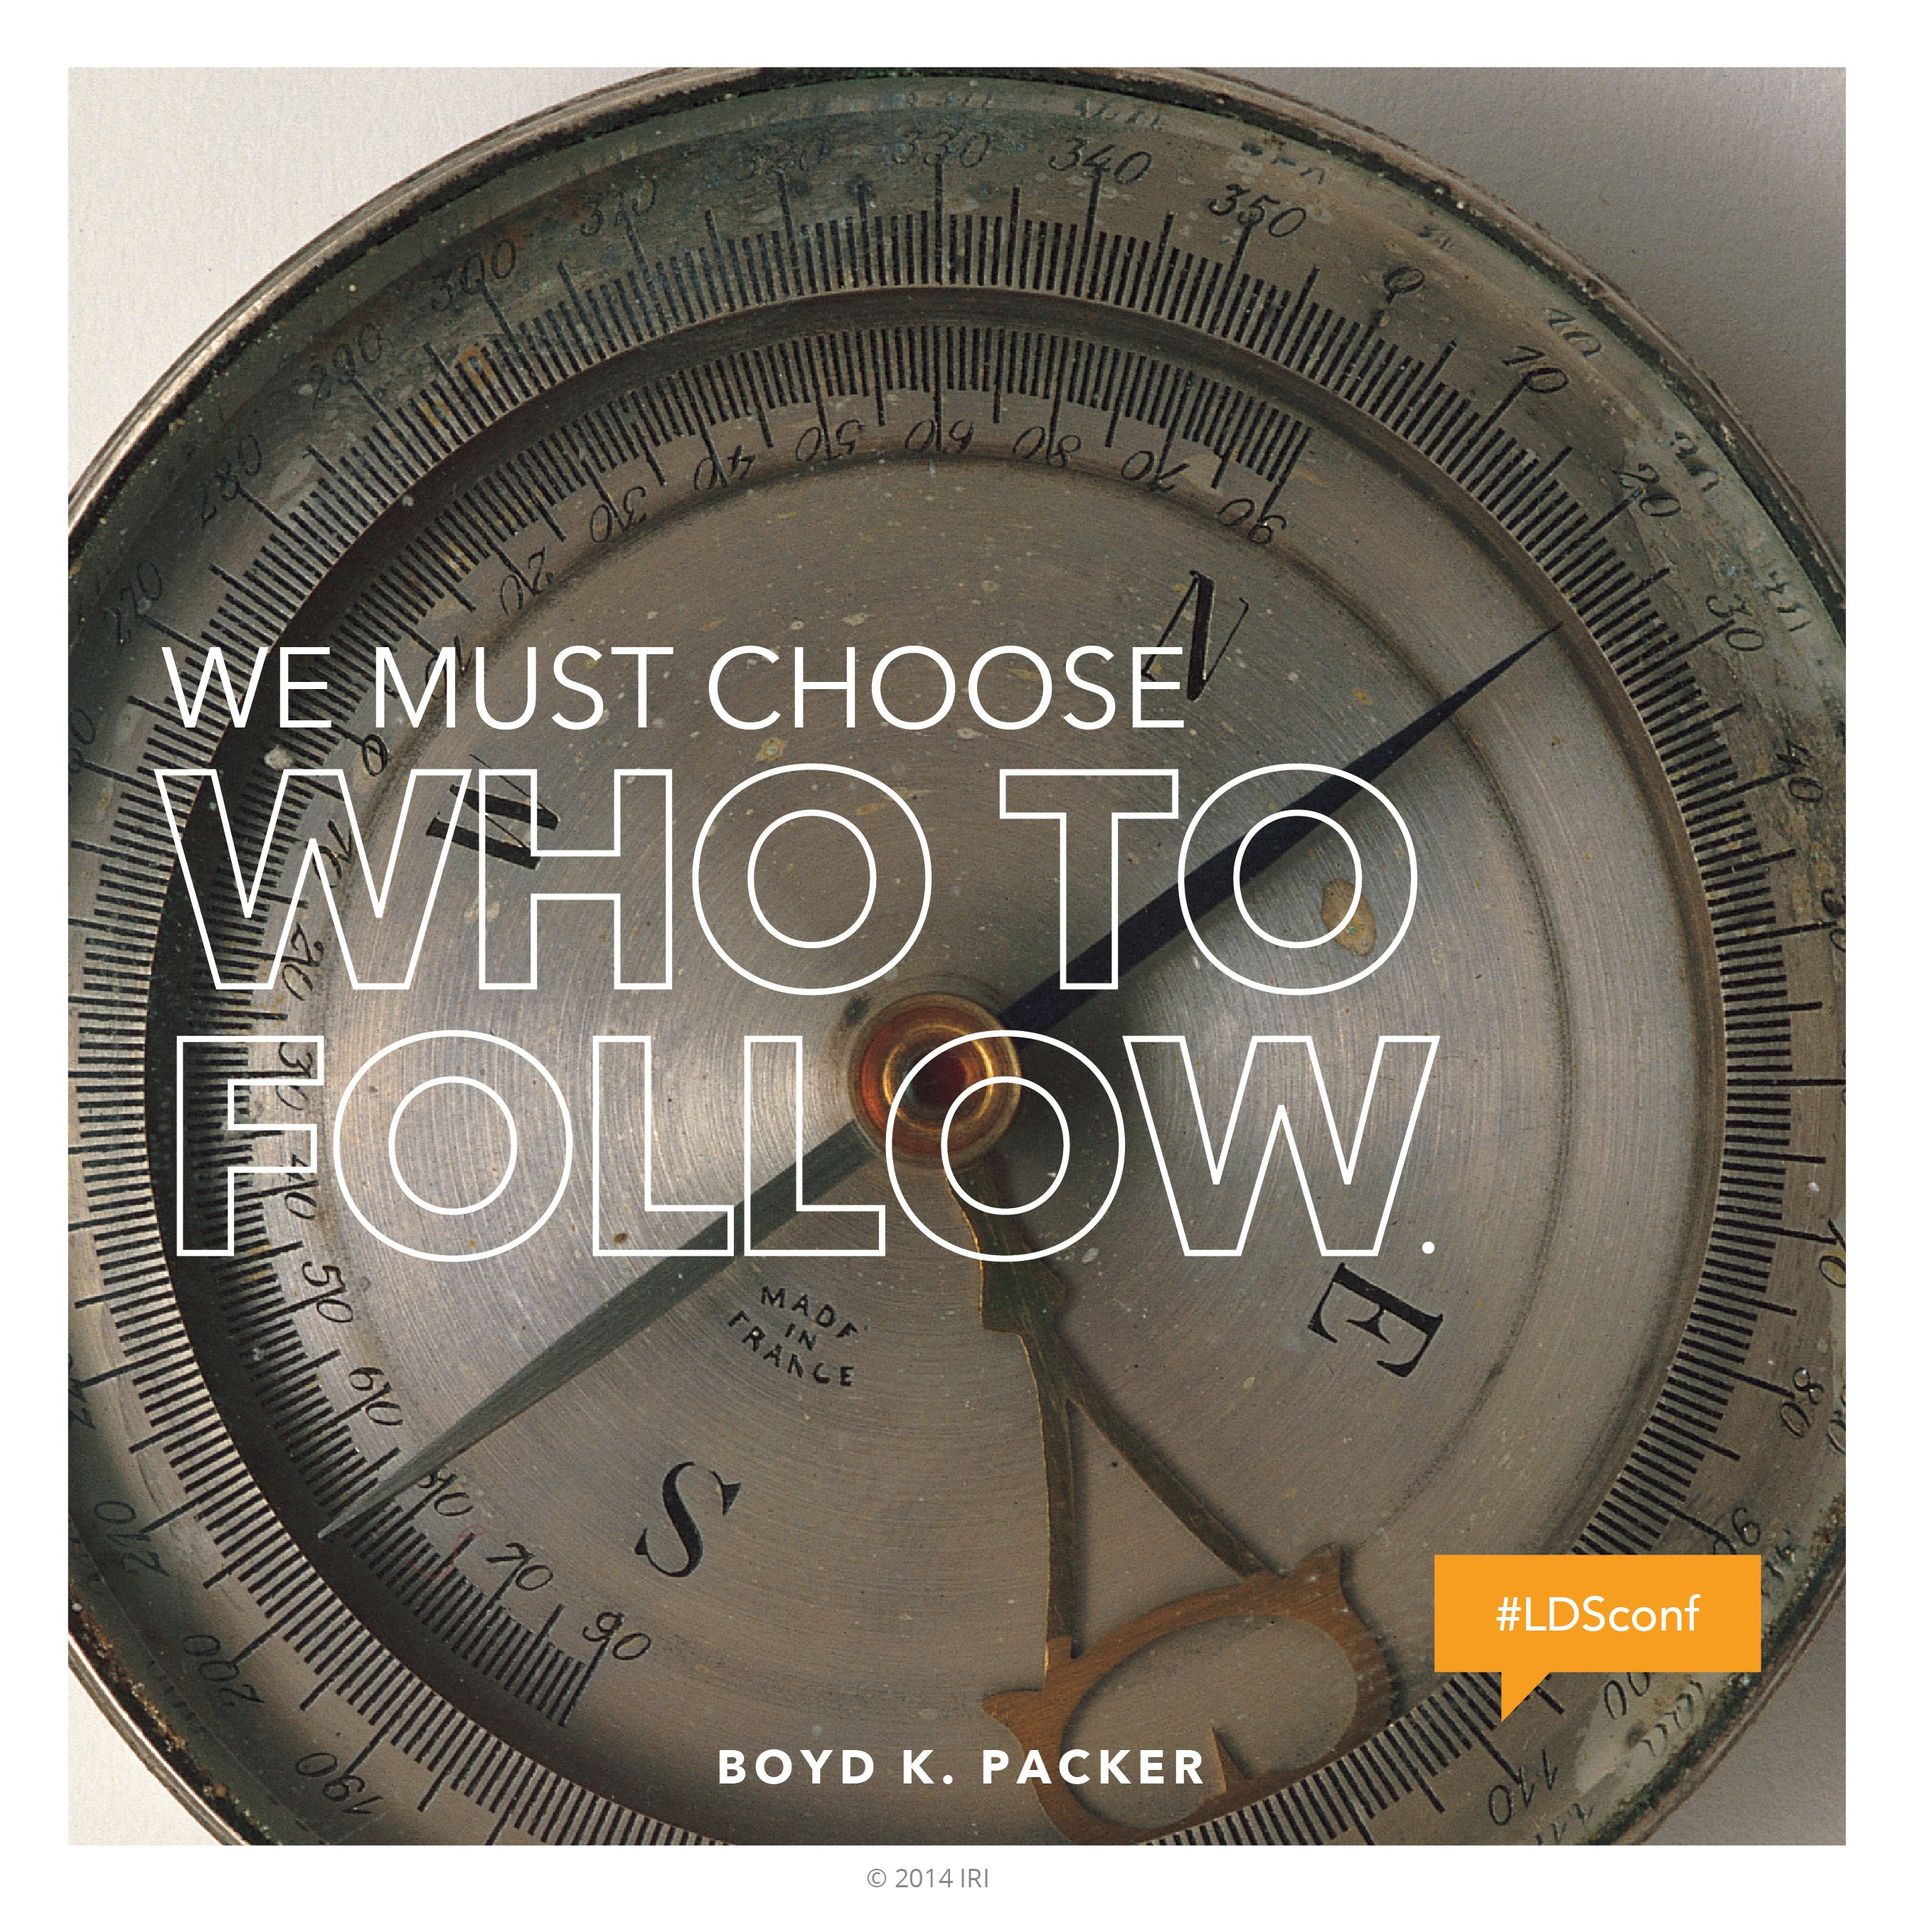 “We must choose who to follow.”—President Boyd K. Packer, “The Witness” © undefined ipCode 1.